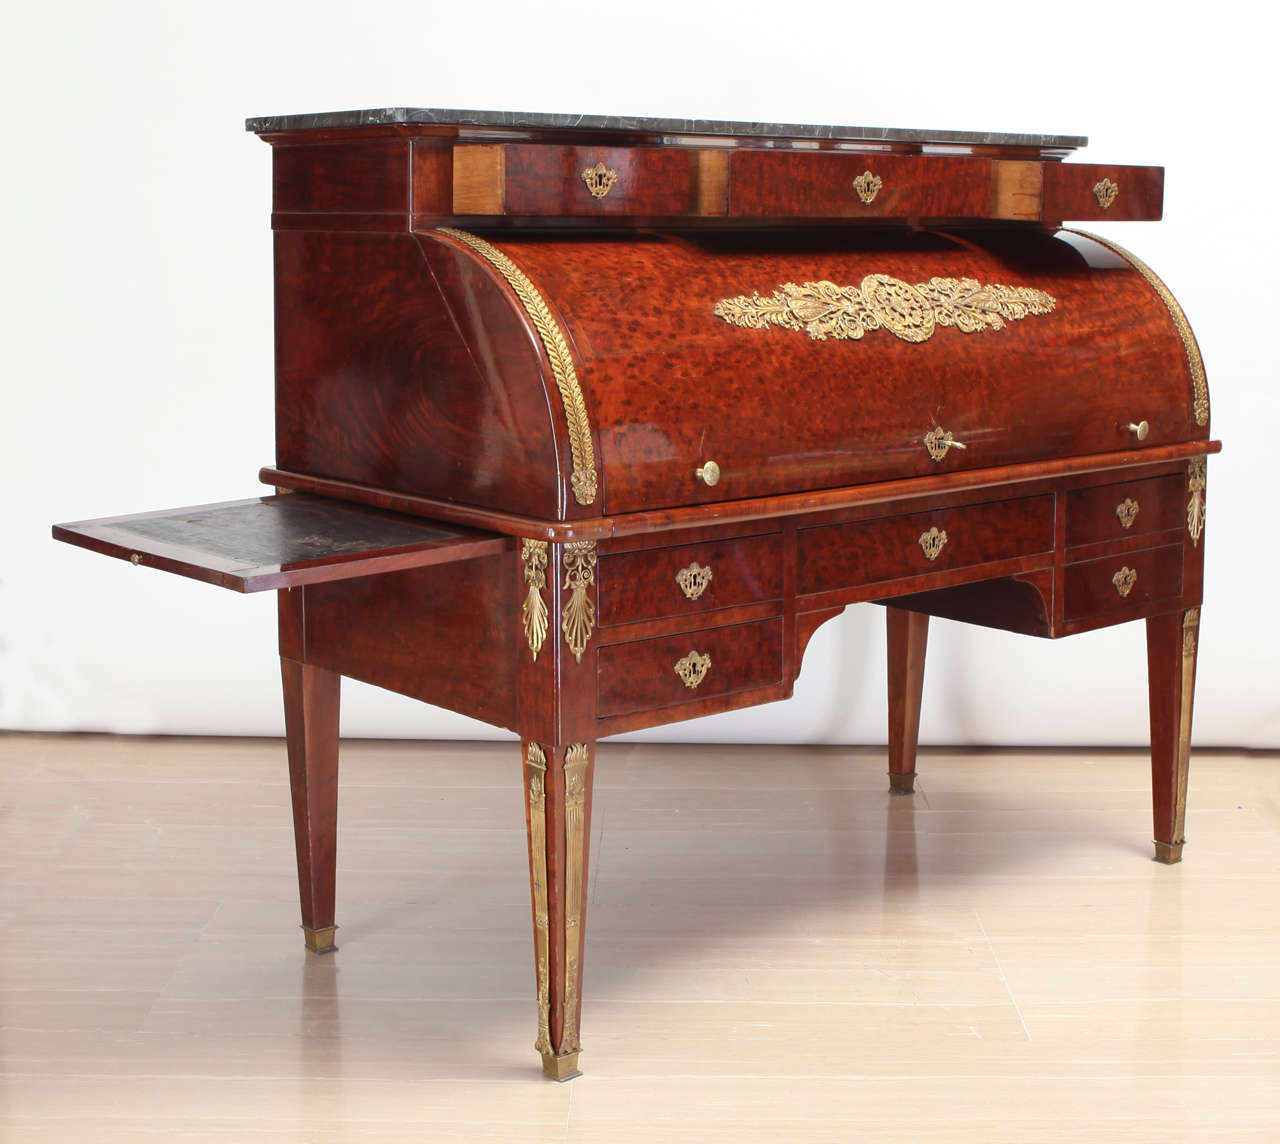 19th Century French Empire Mahogany Bureau à Cylindre Writing Table, circa 1810 For Sale